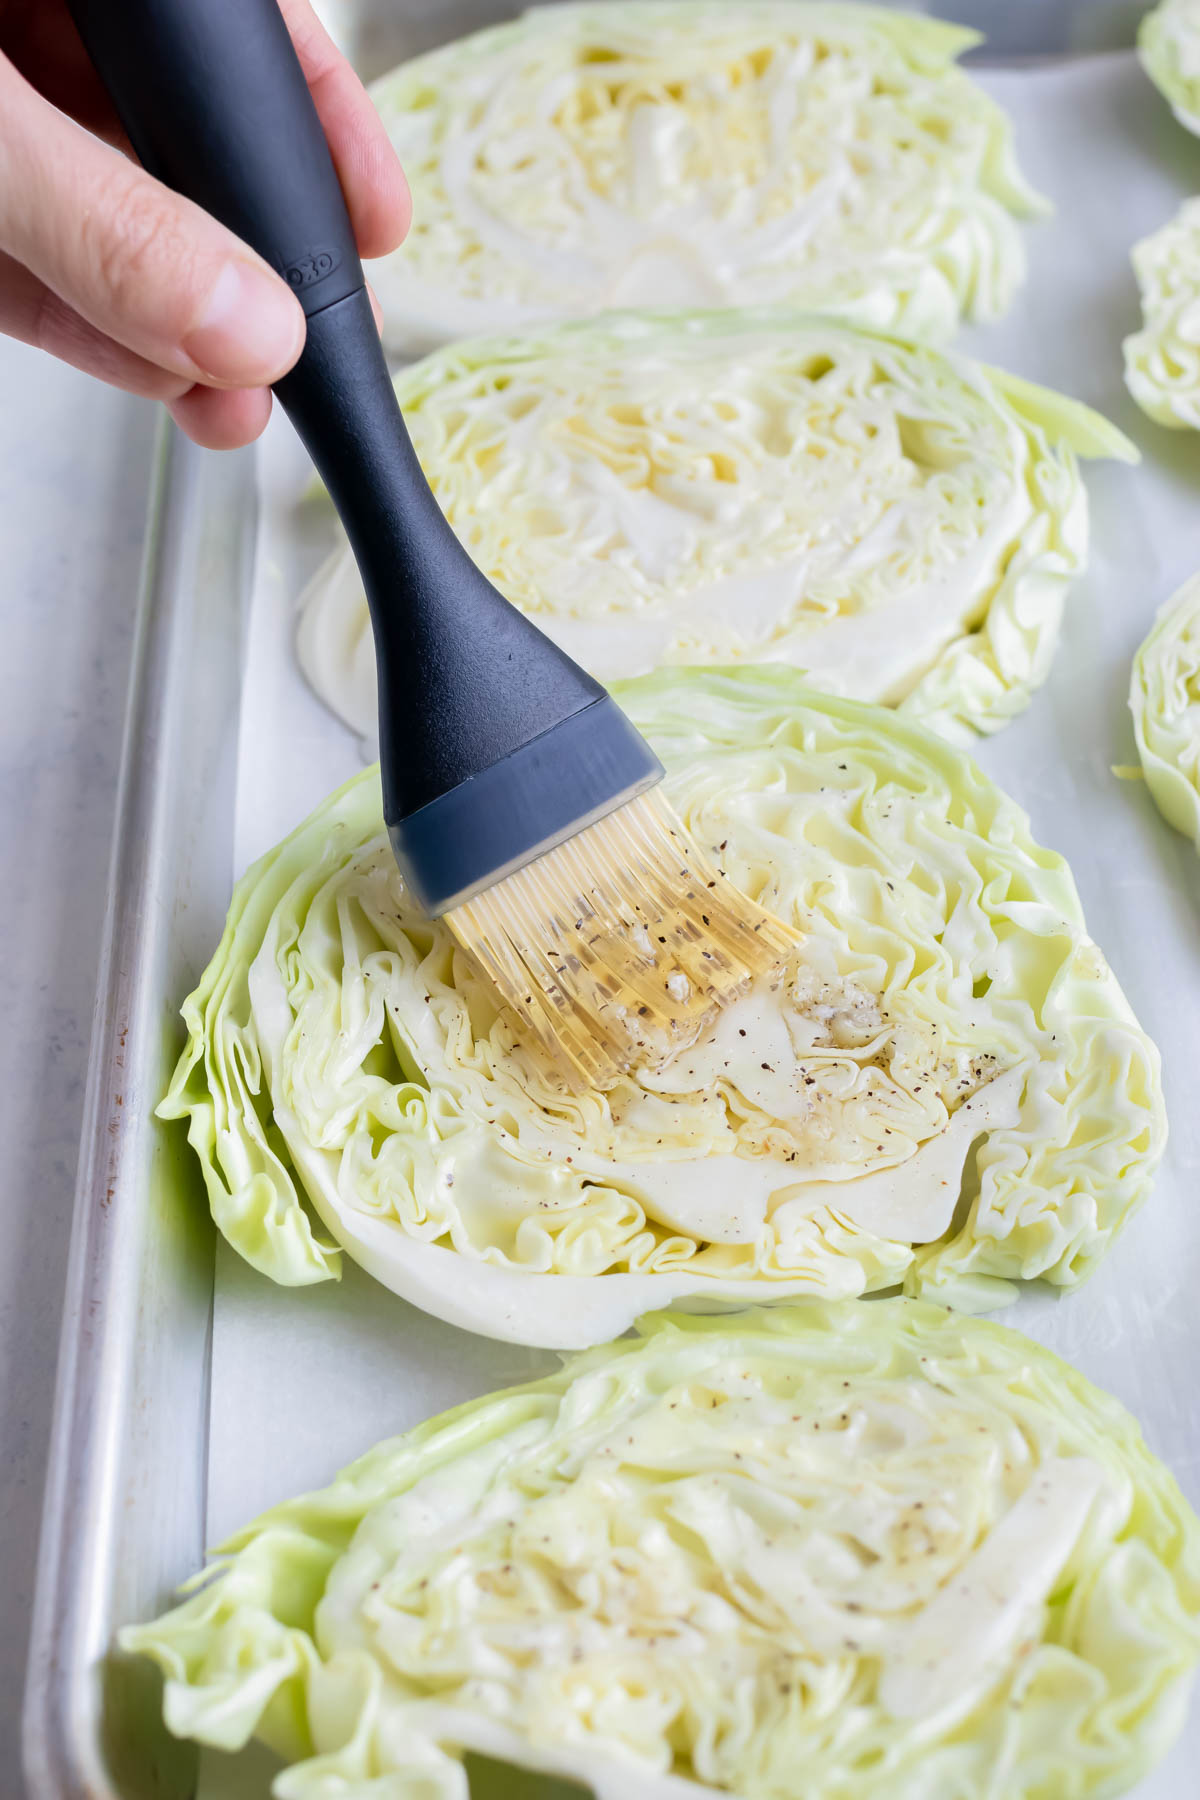 Cabbage steak is brushed with a garlic sauce before roasting.